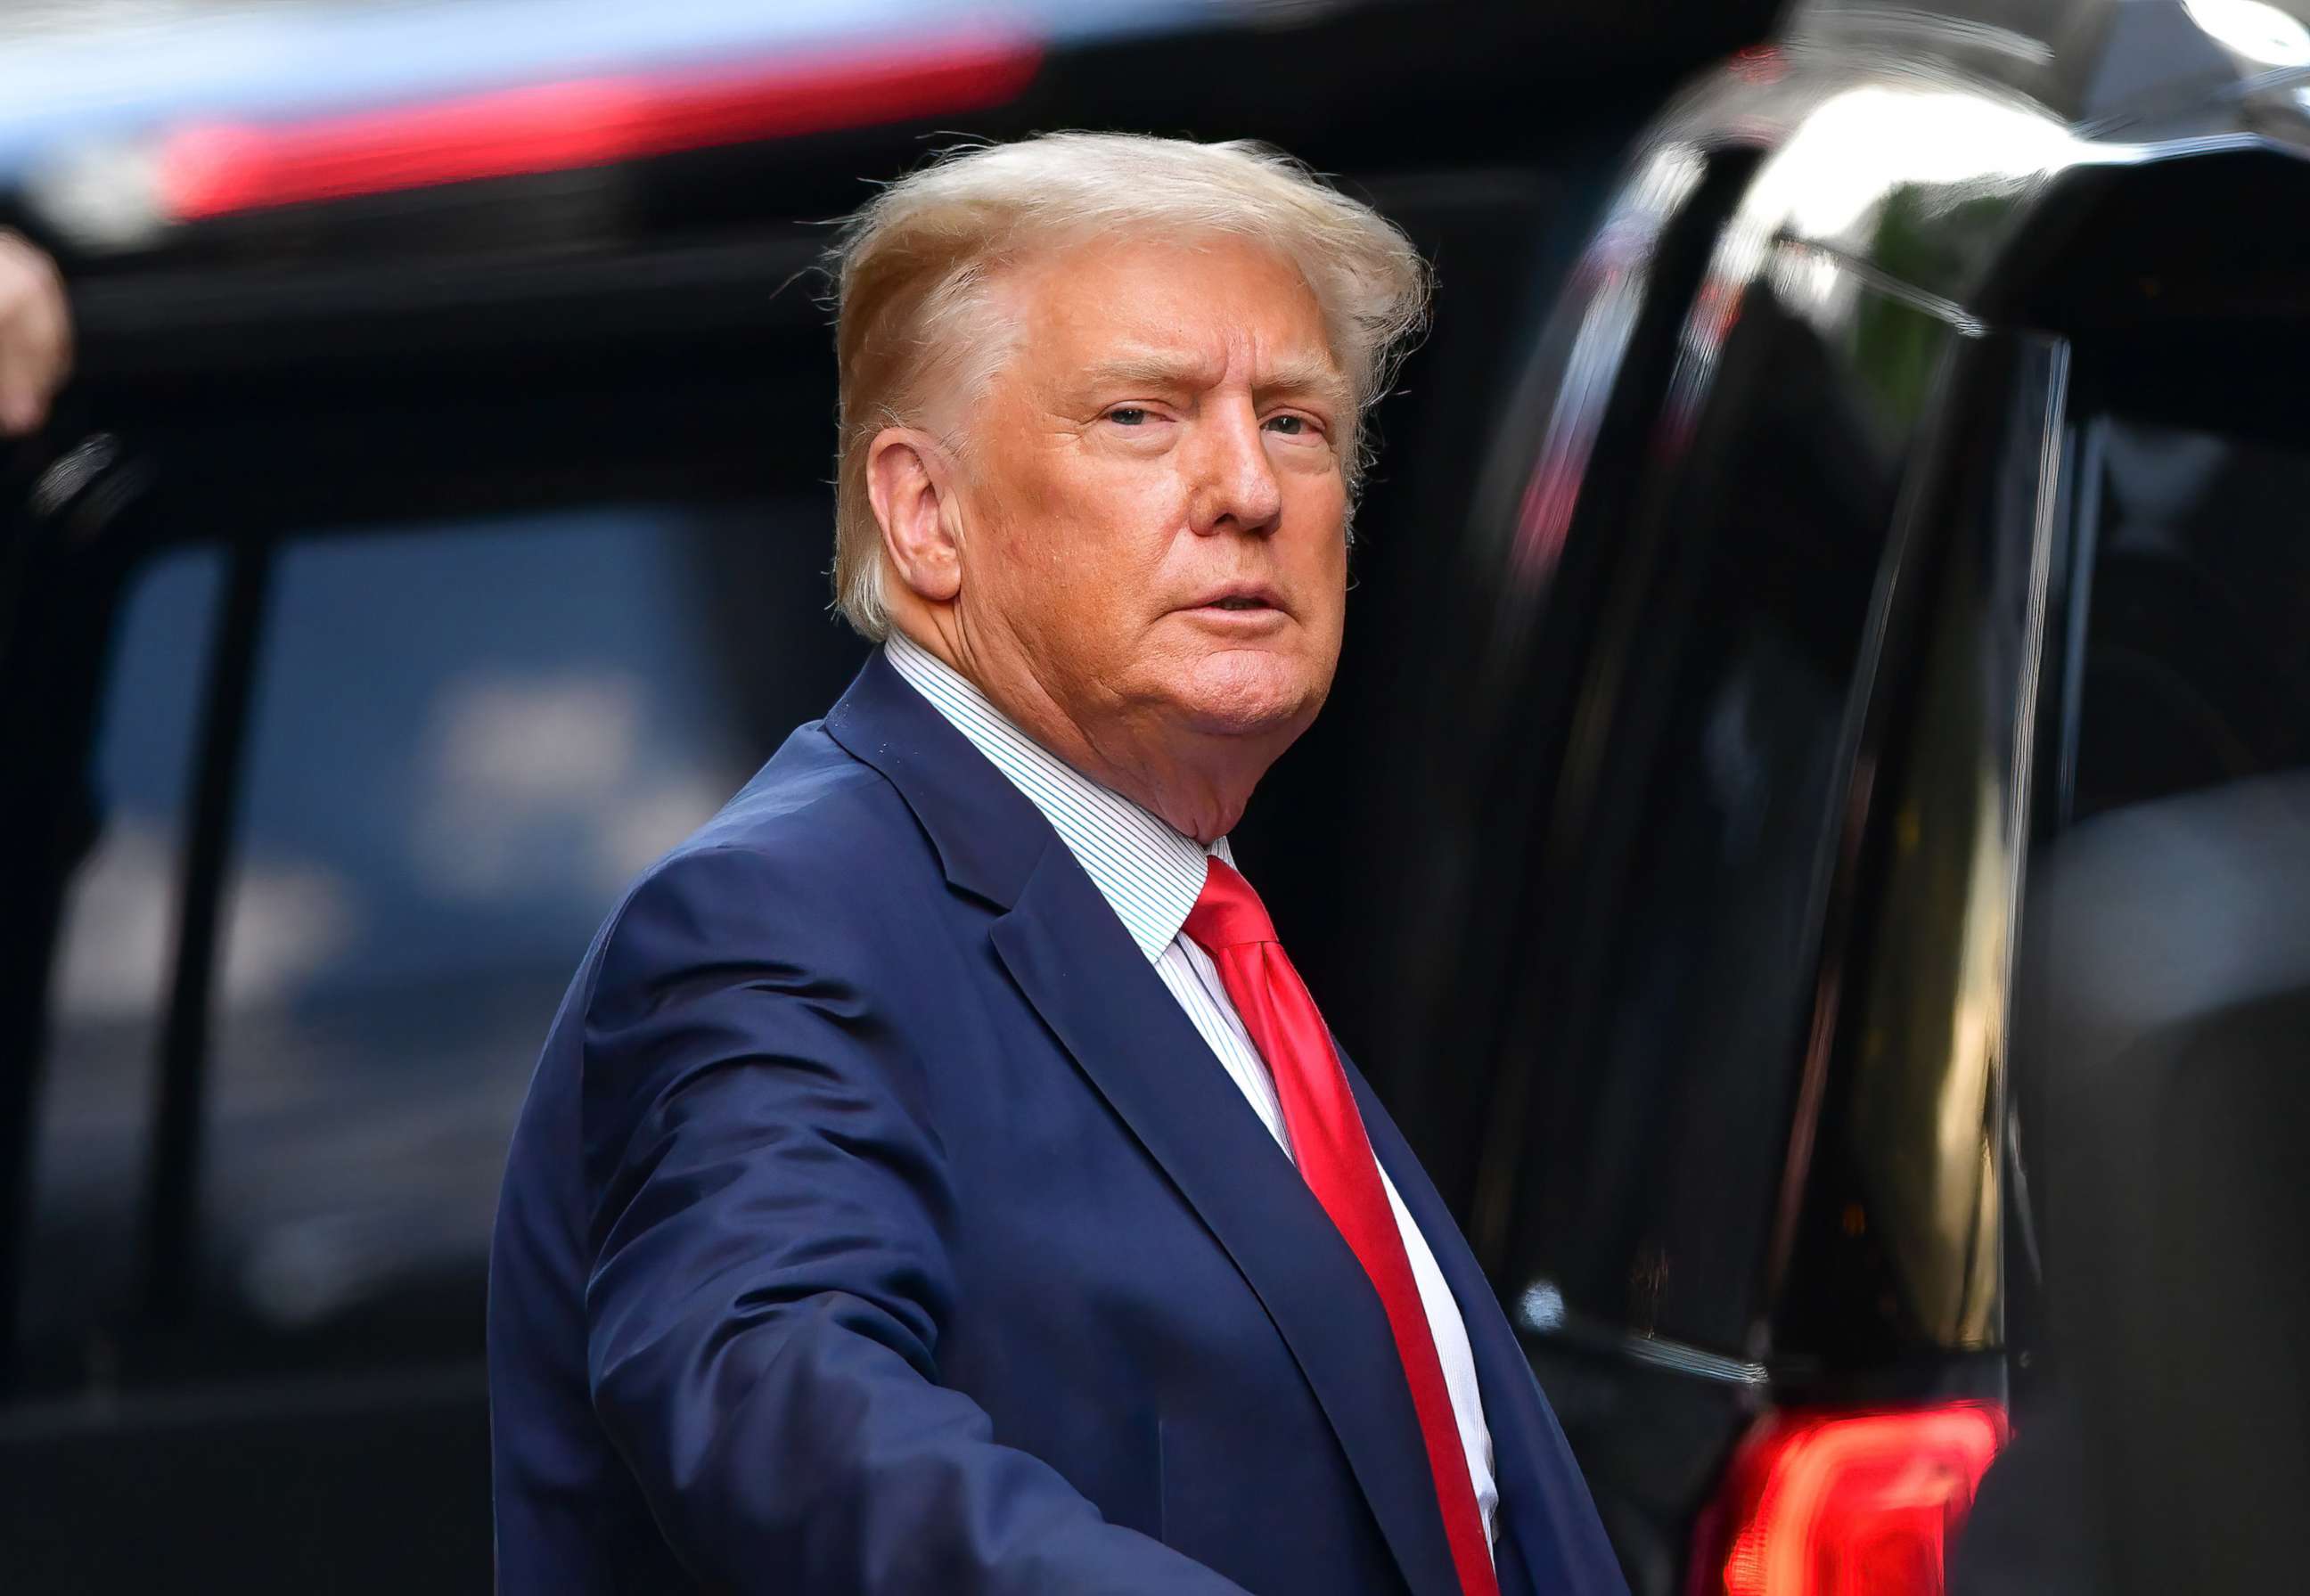 PHOTO: Former U.S. President Donald Trump leaves Trump Tower in Manhattan on May 18, 2021, in New York.